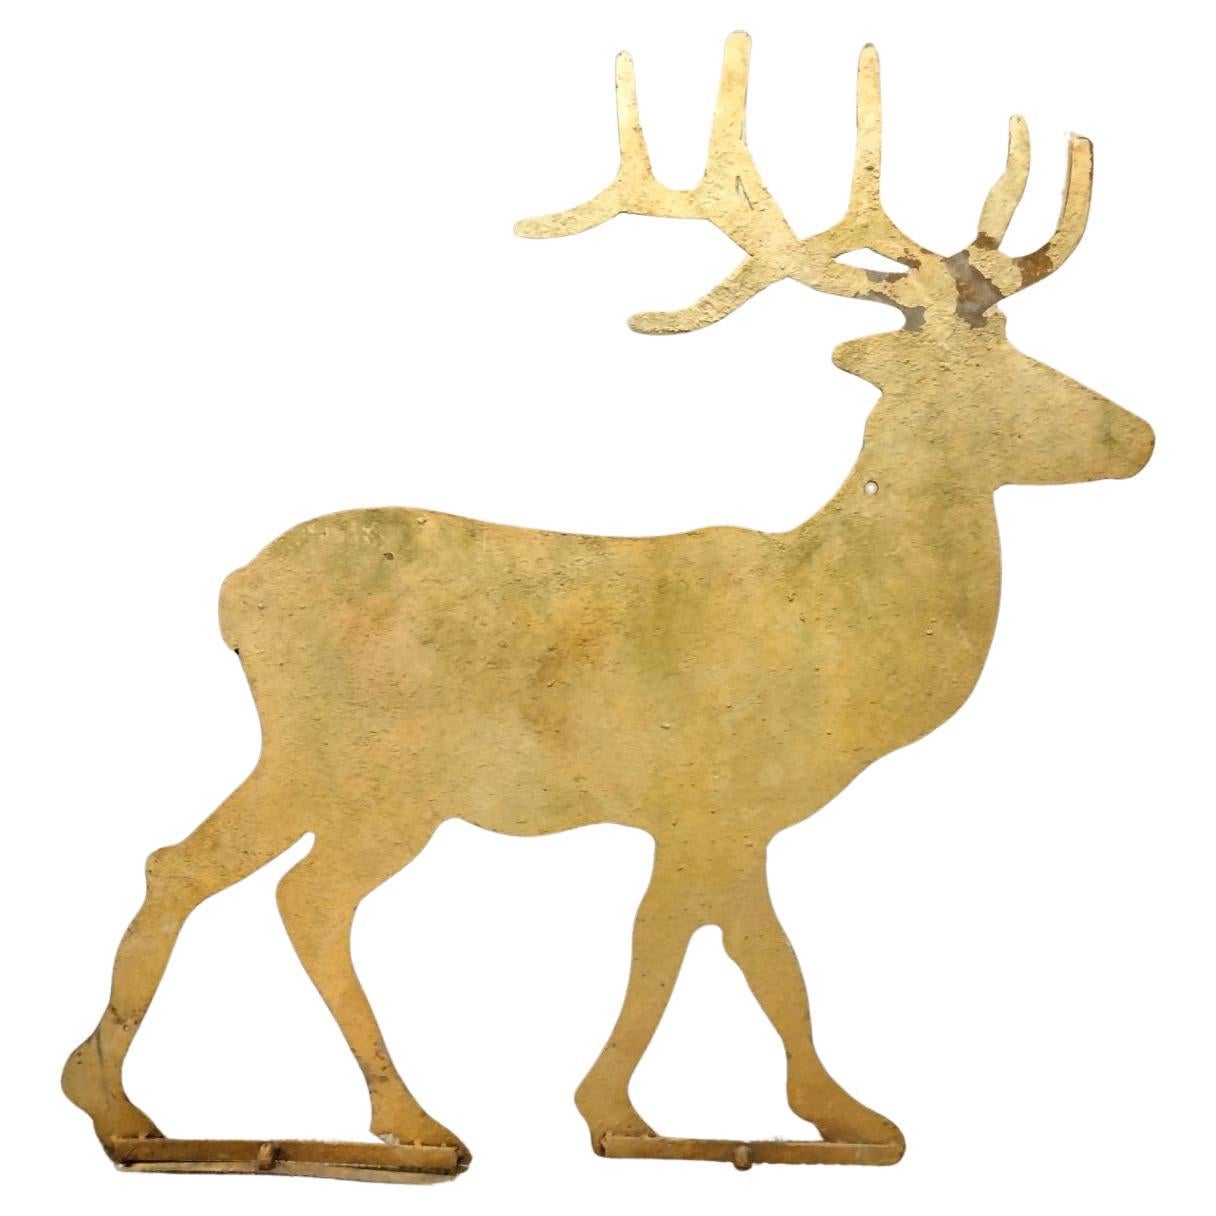 This amazing original mustard painted sheet iron stag /deer trade sign was found in Lancaster County,Pennsylvania.The condition is very good with minor paint loss on horns.This  trade sign was from a gun shop in Pennsylvania.